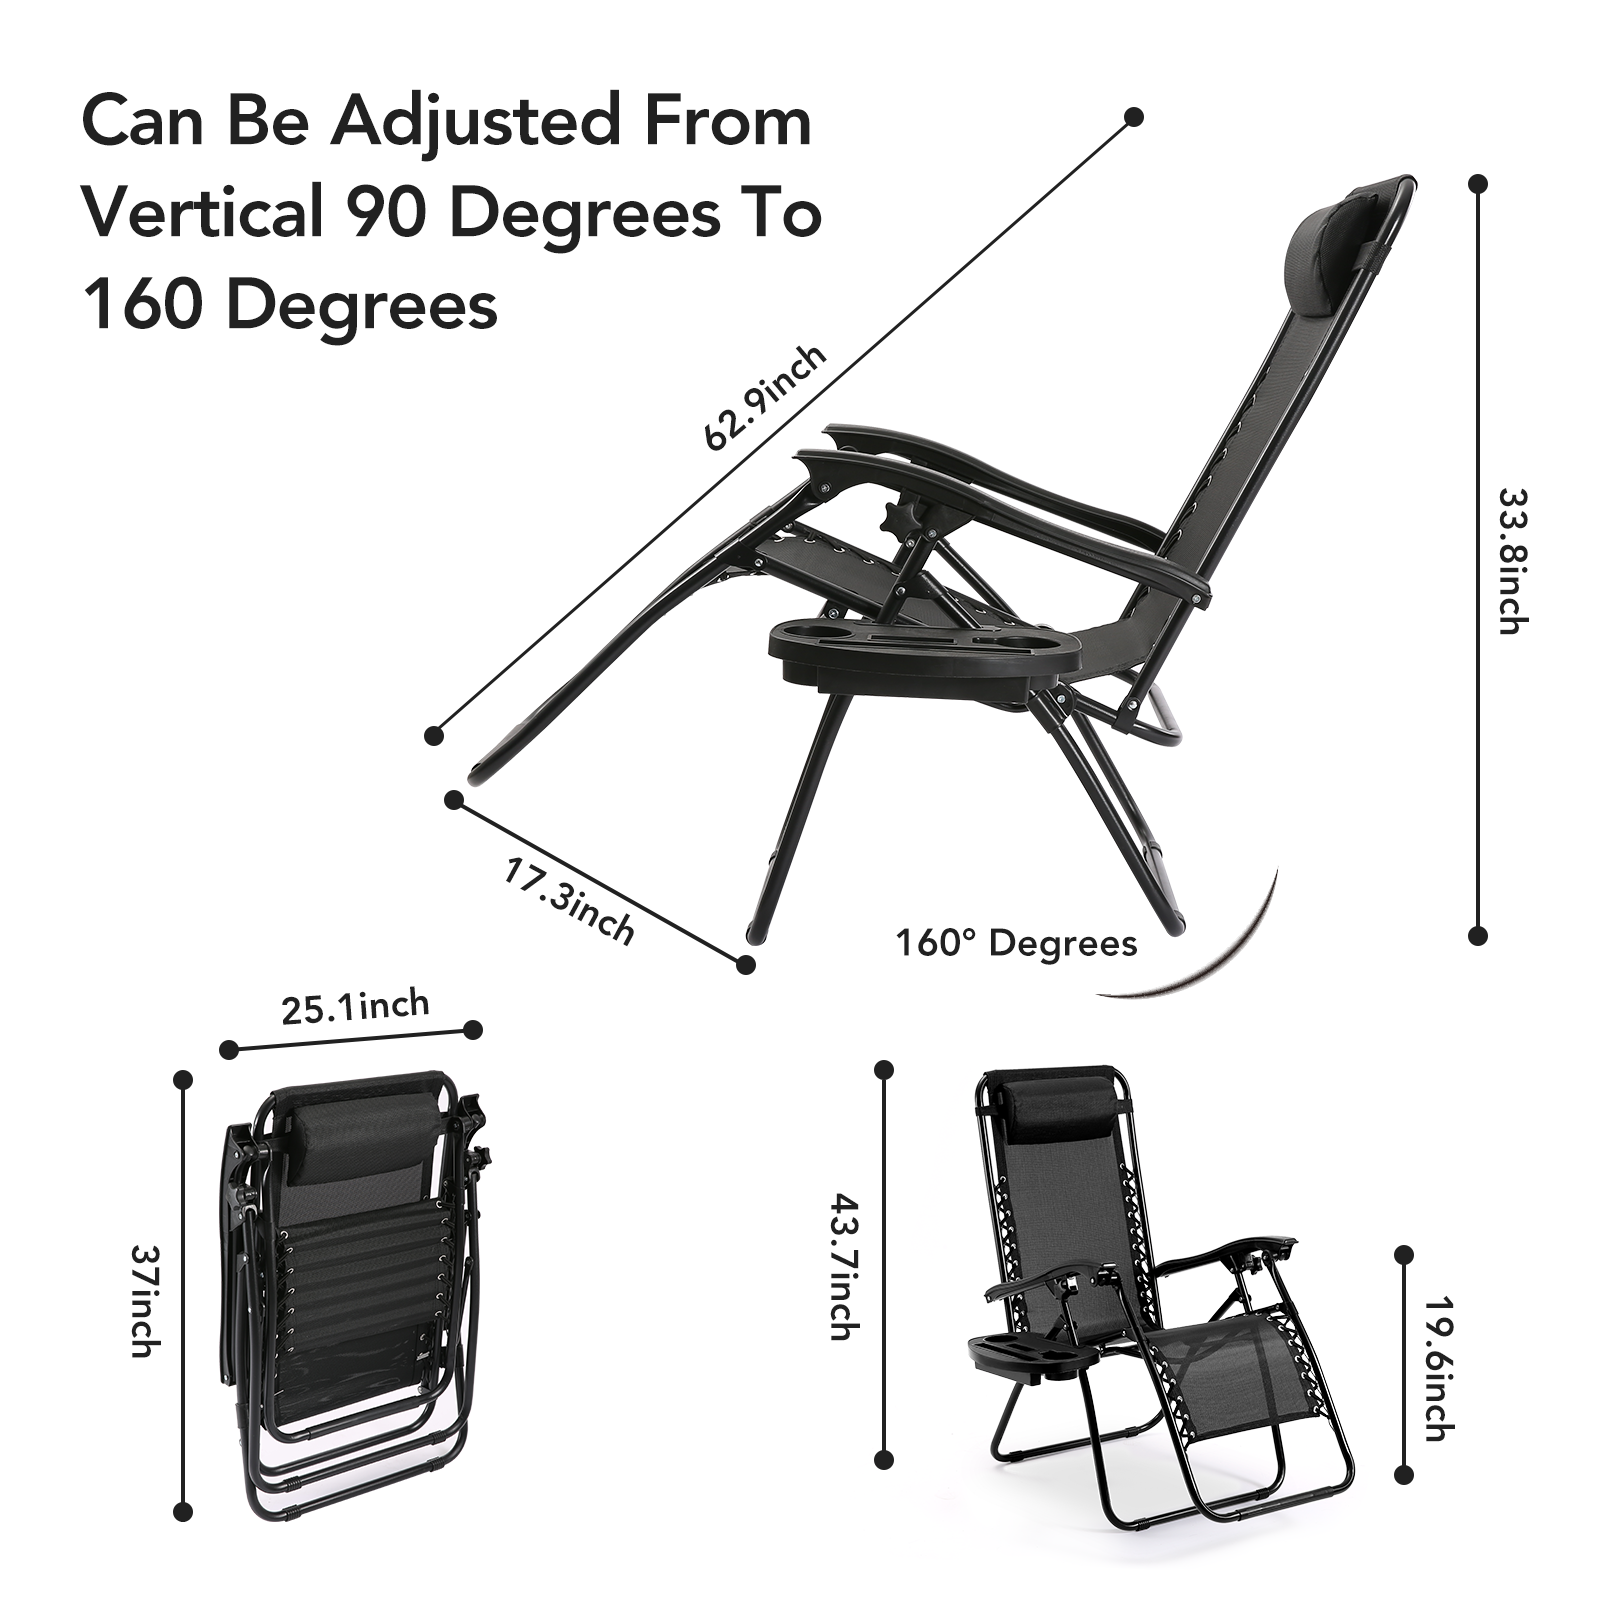 Load image into Gallery viewer, Zero Gravity Chairs Patio Chairs Set of 2 Reclining Beach Chair Adjustable Steel Mesh Zero Gravity Lounge Chair Recliners w/Pillows and Cup Holder Trays for Poolside, Backyard, Beach, Camping
